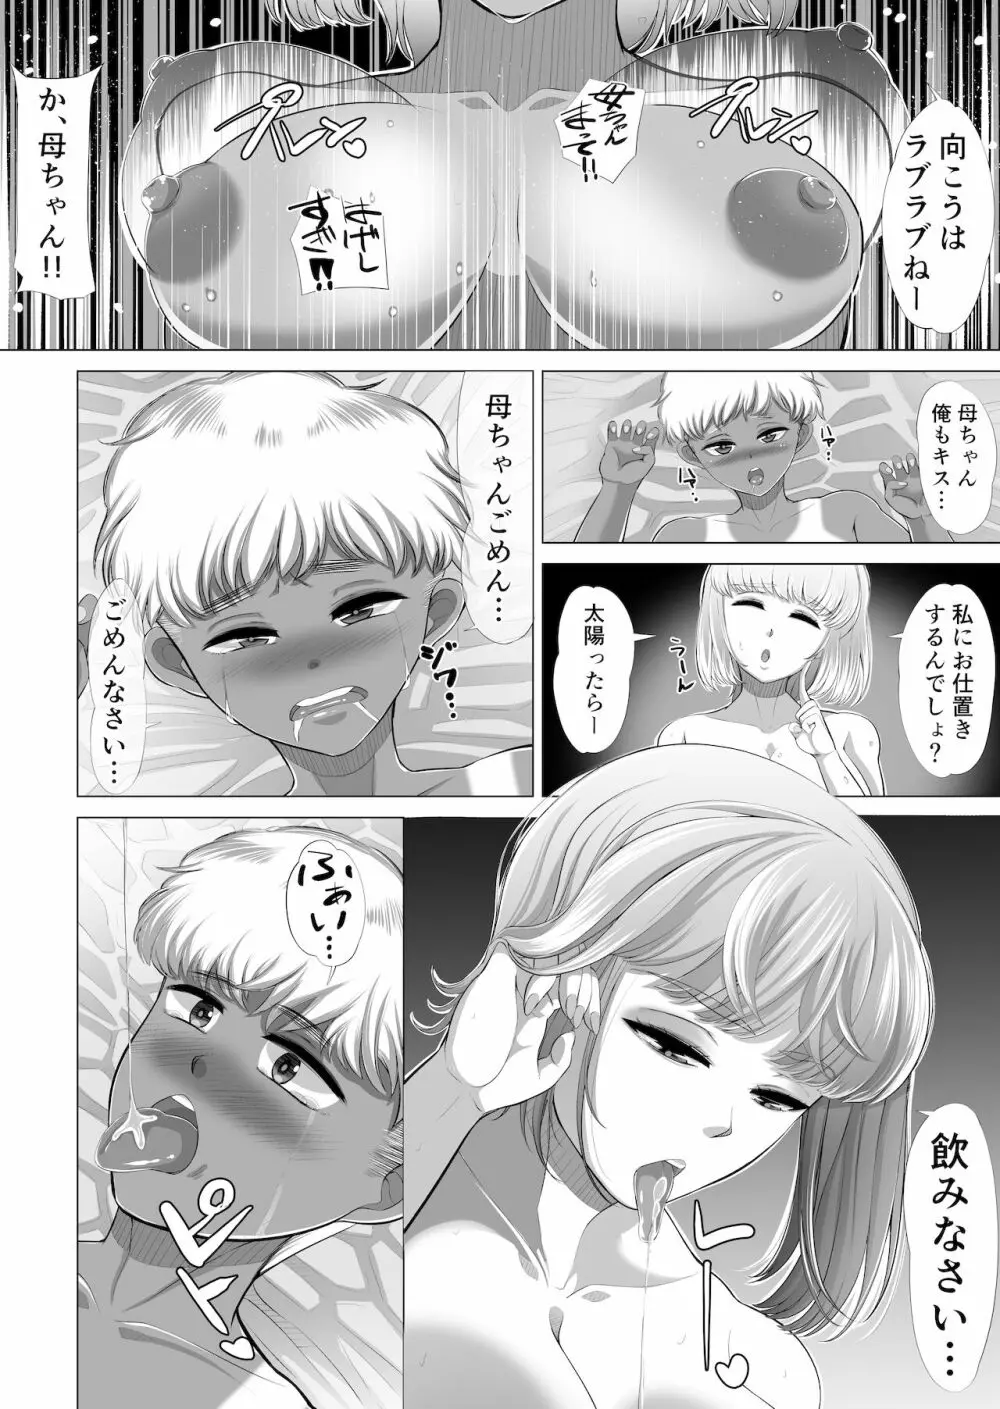 The 神孕村～やっくをやっつけろの巻～ Page.46